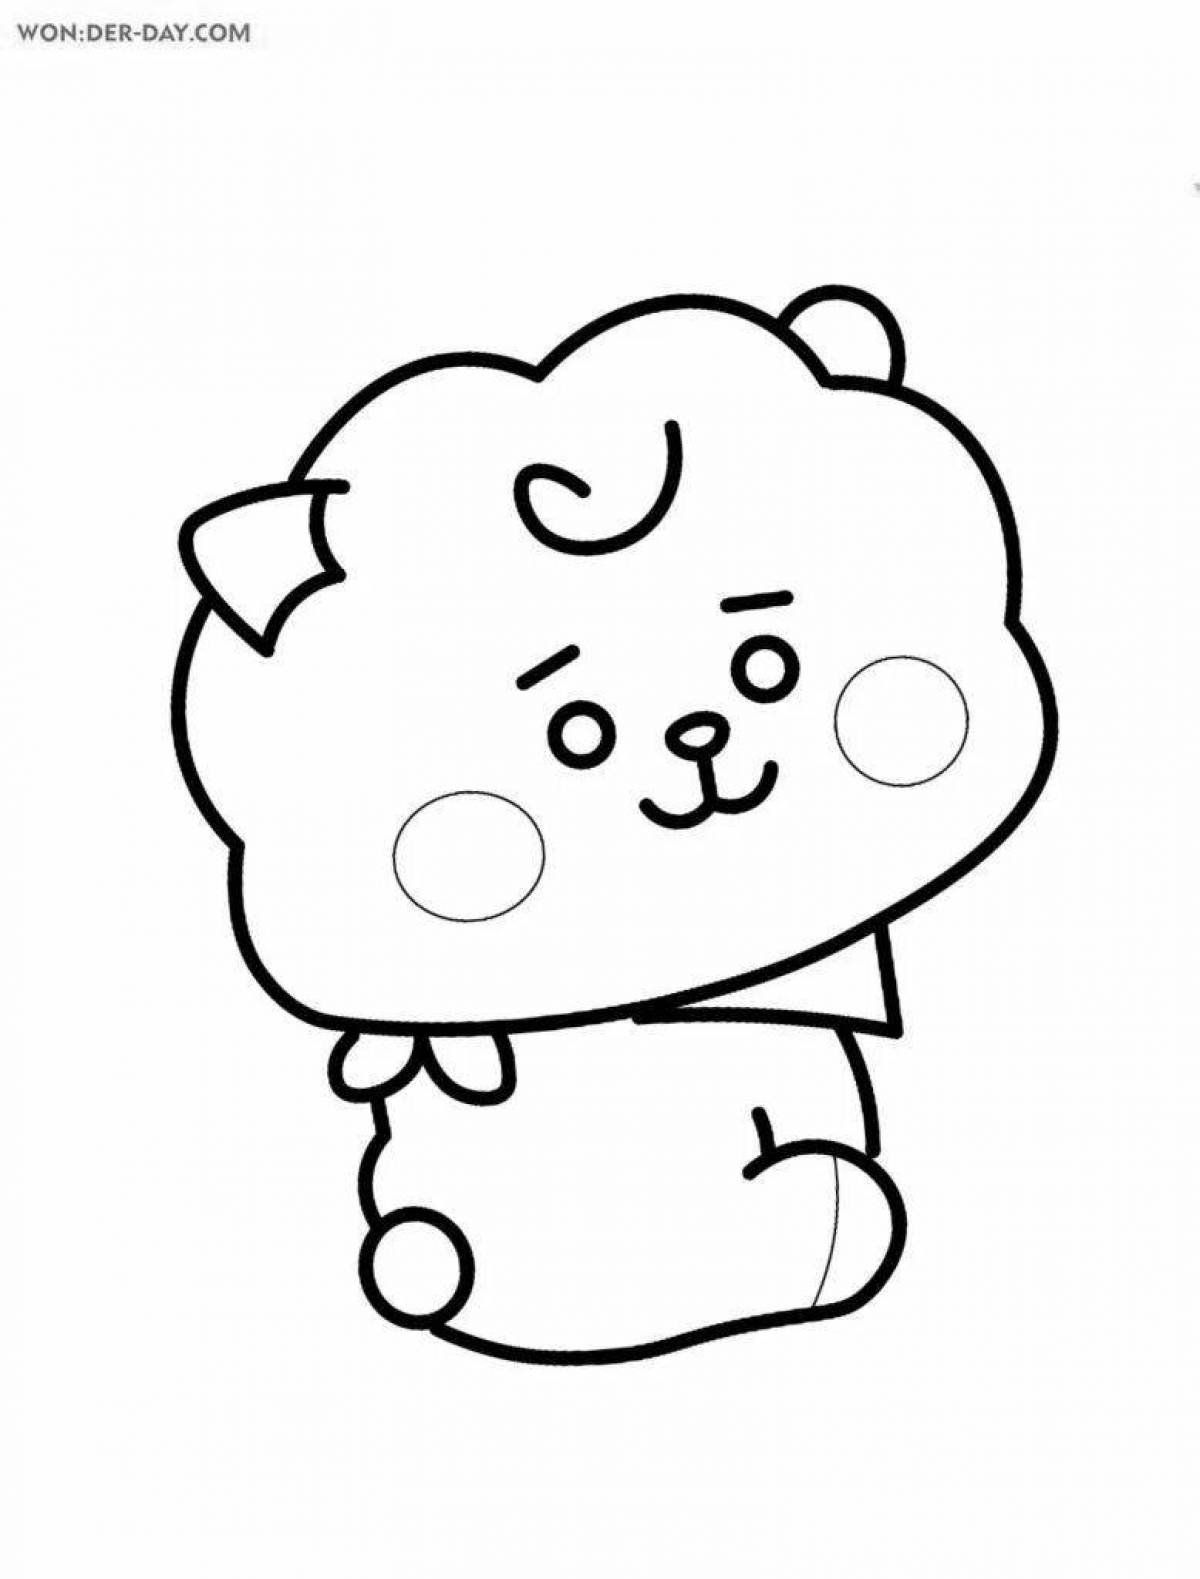 Cookie bt21 exciting coloring